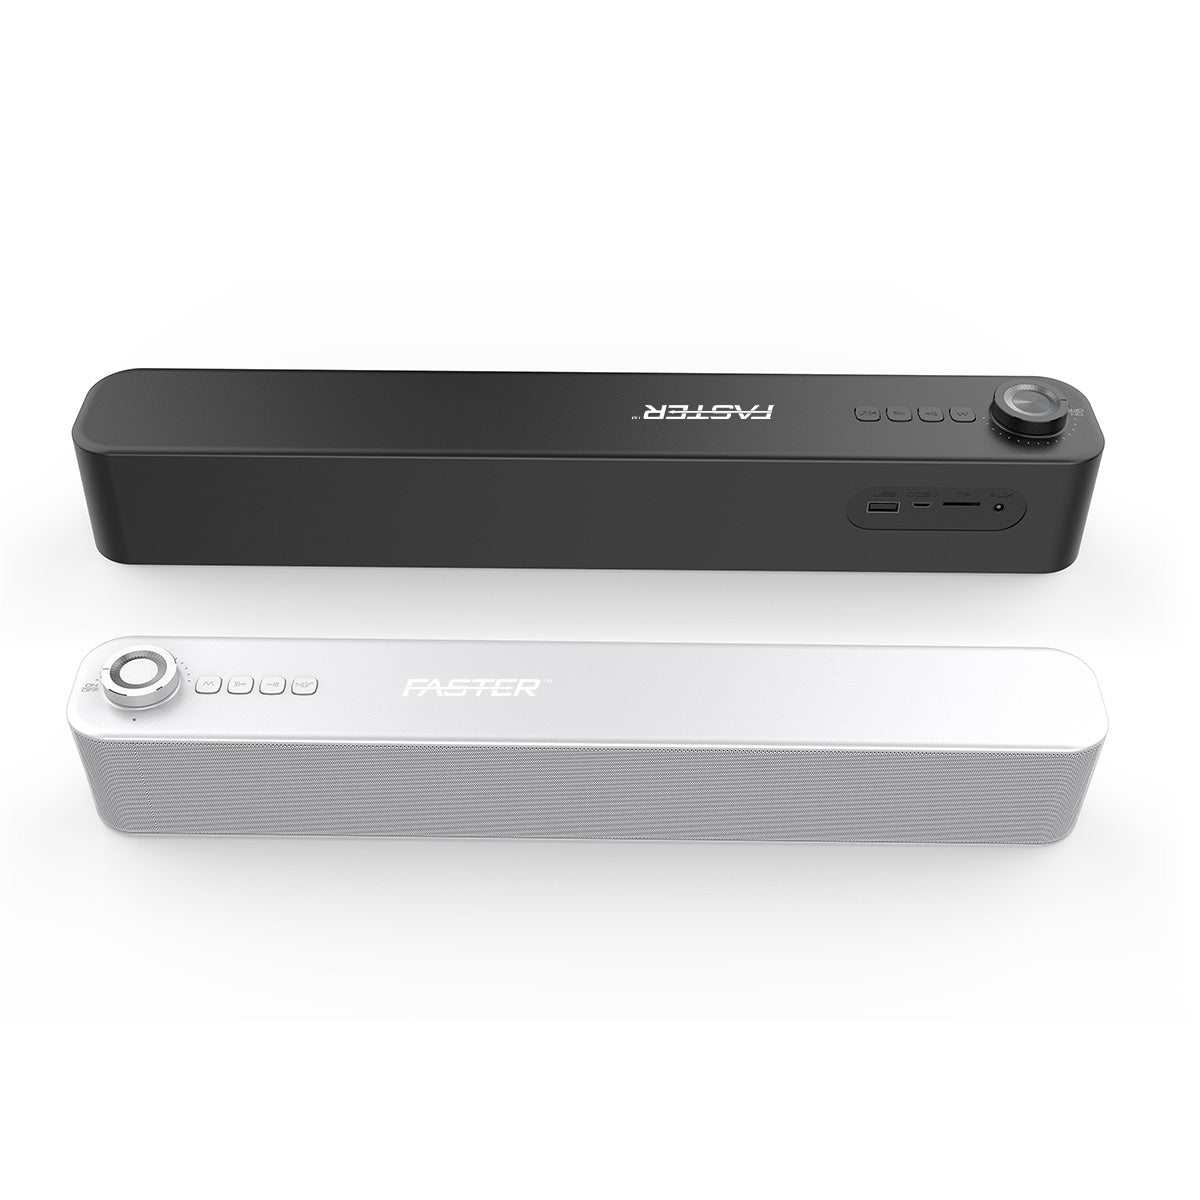 Close-up top view of the Faster Z5 soundbar wireless speaker  on white background